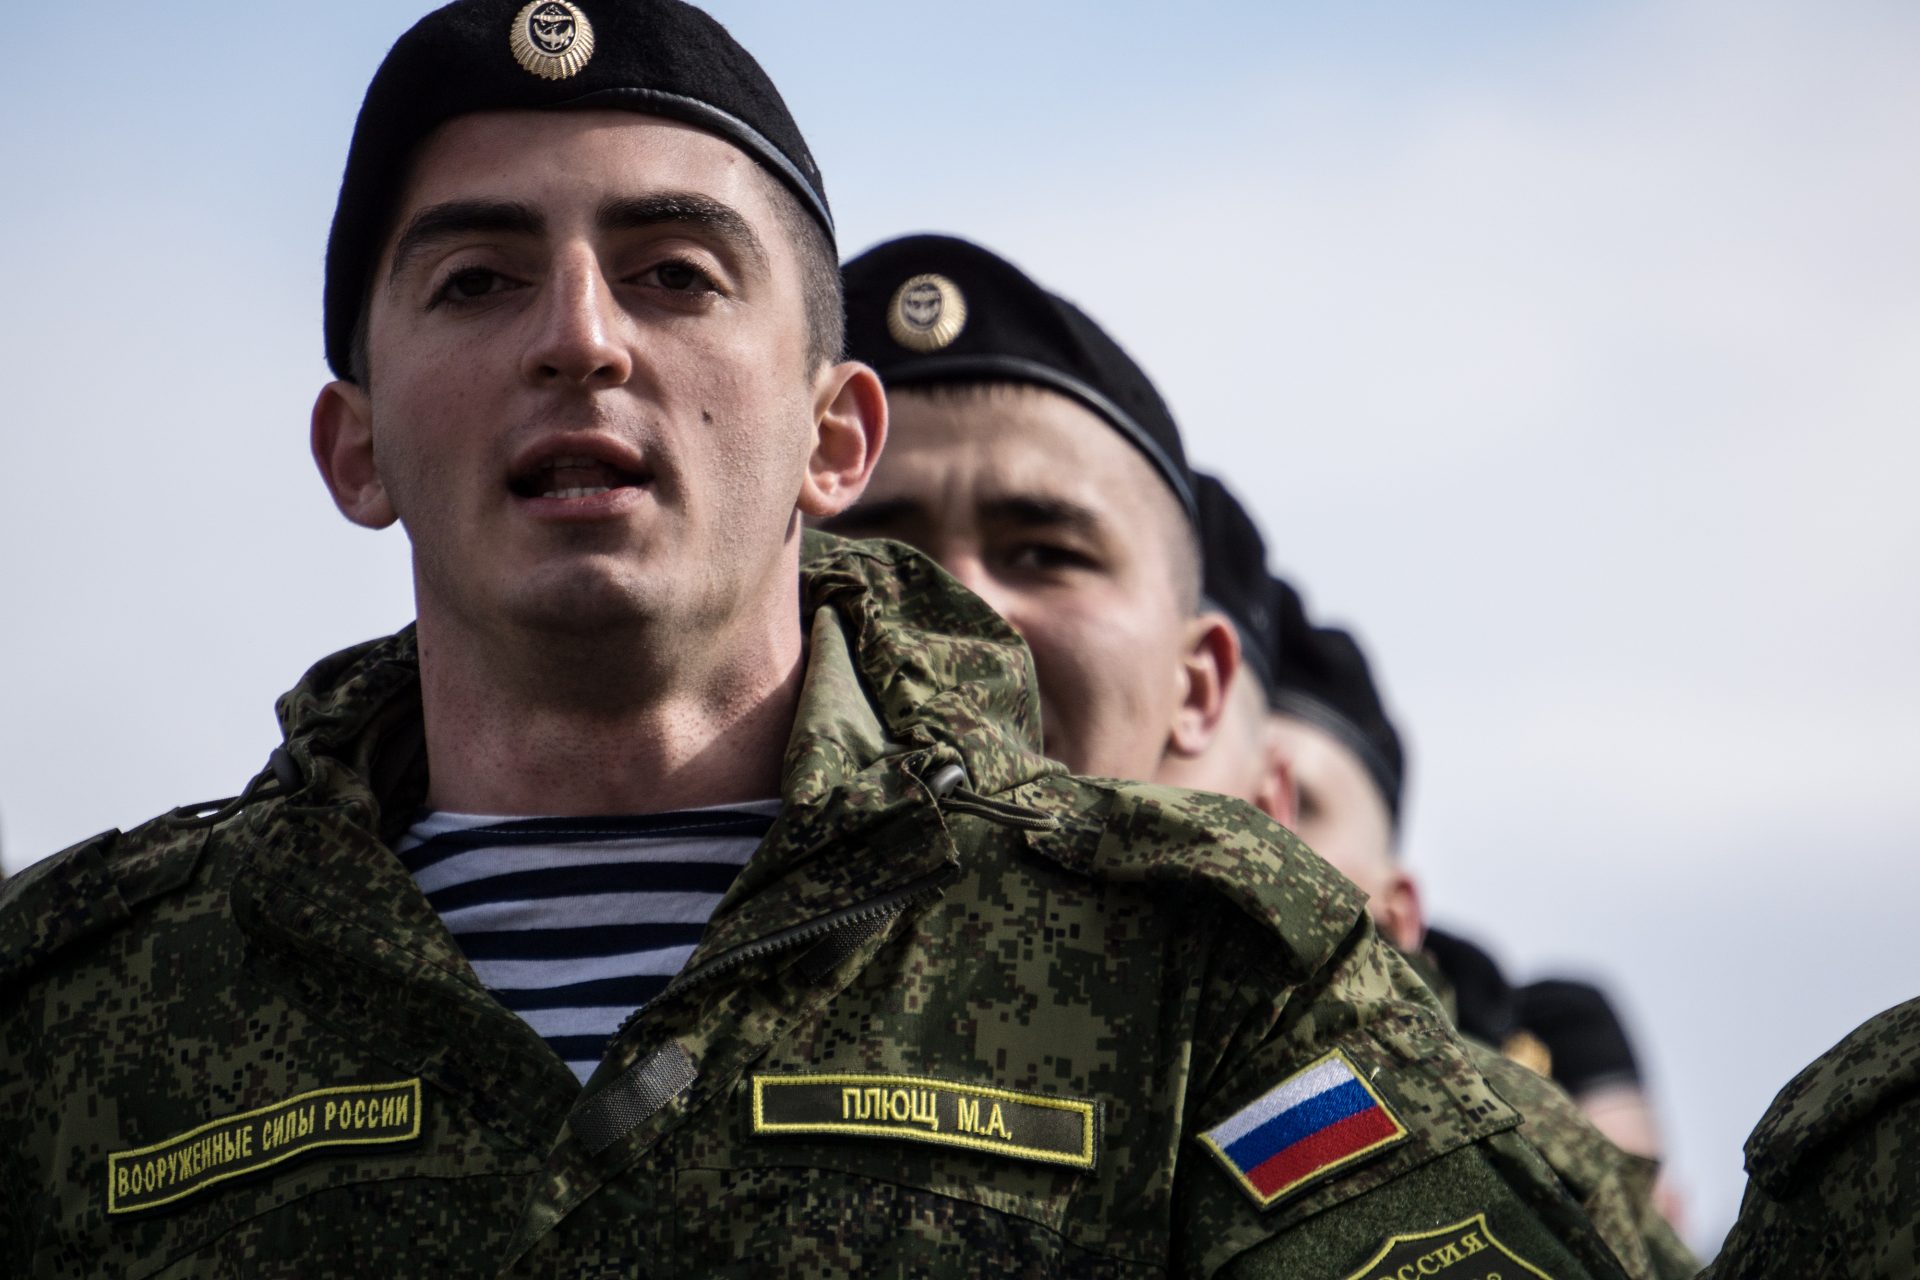 Has the Russian military's corruption issues hurt its war effort?